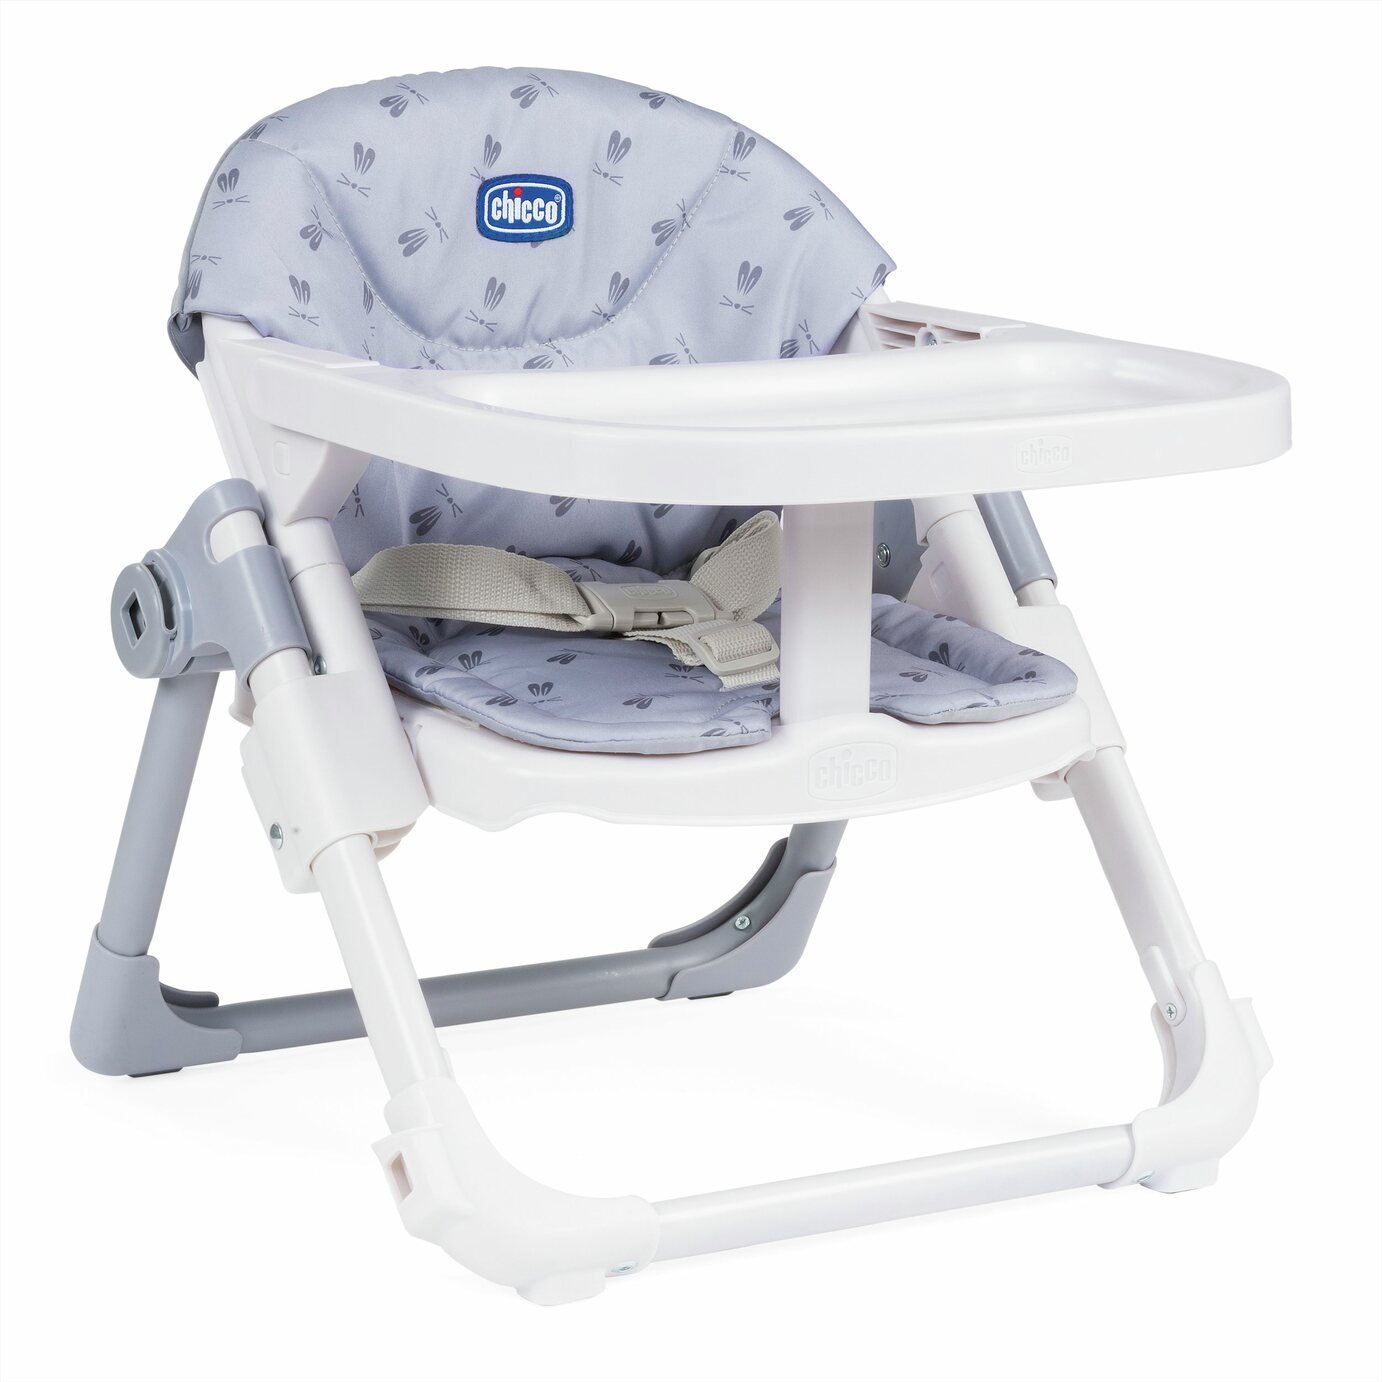 Chicco Chairy Booster Seat Review